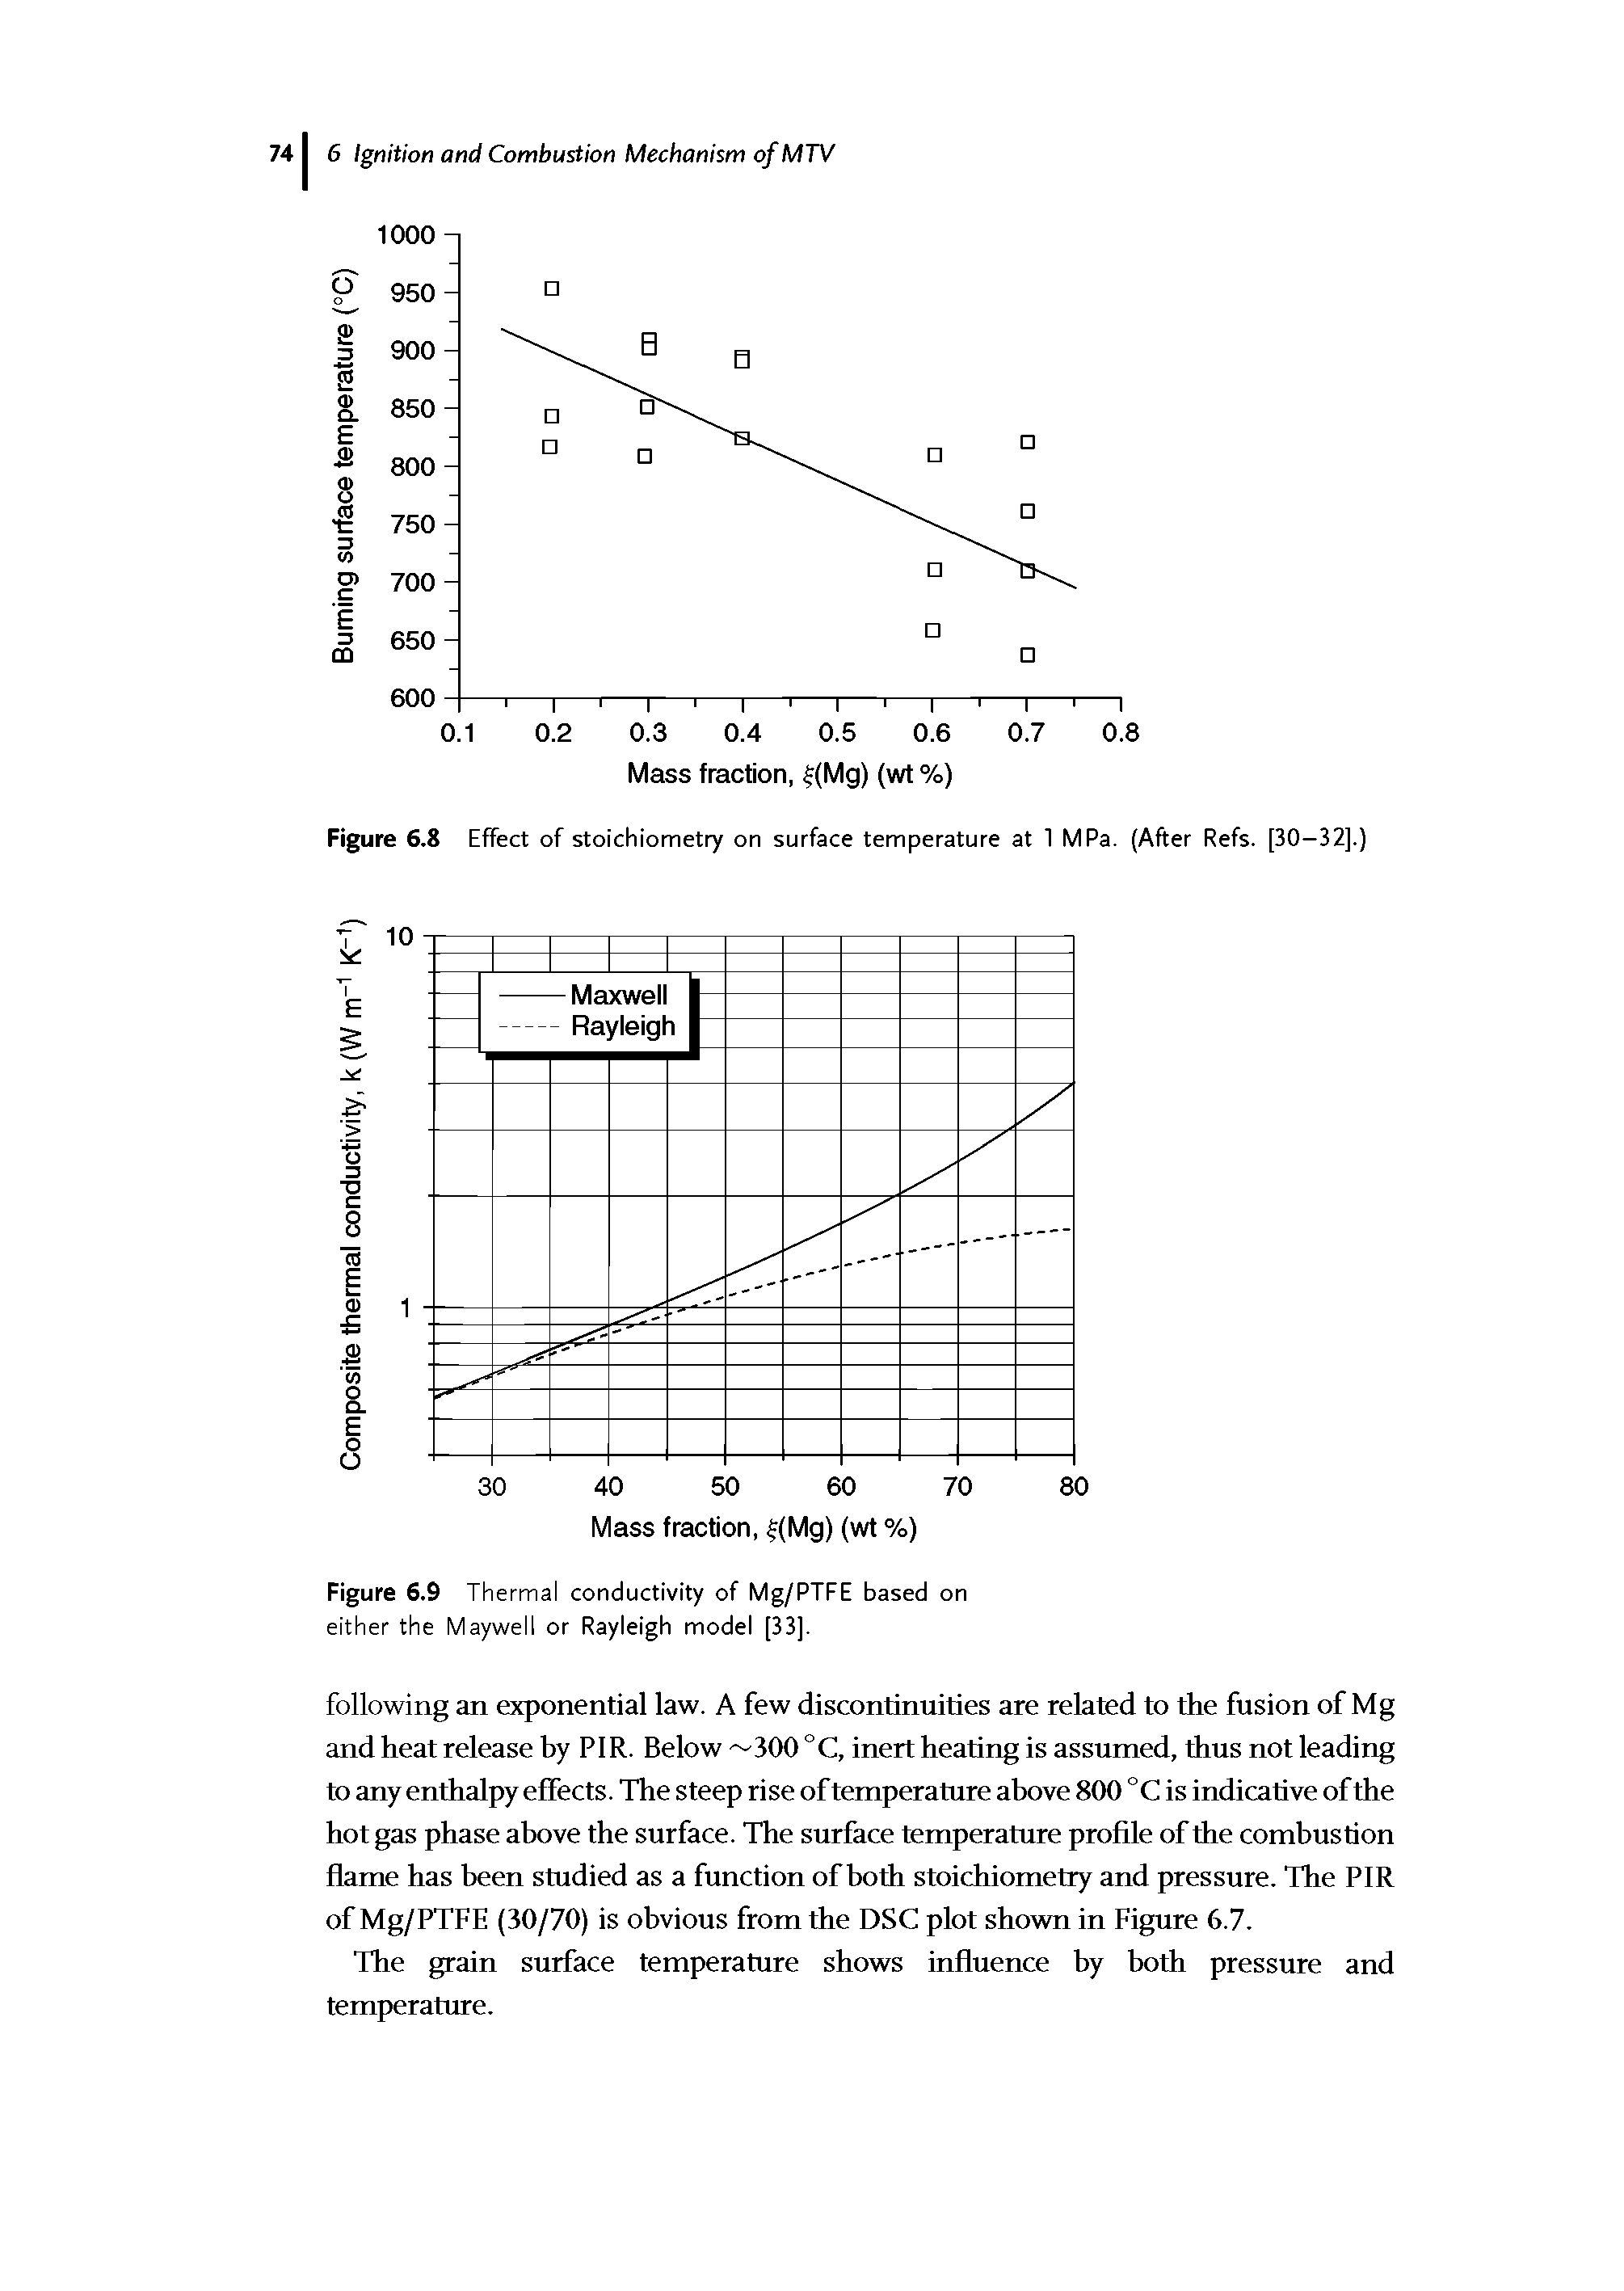 Figure 6.9 Thermal conductivity of Mg/PTFE based on either the Maywell or Rayleigh model [33].